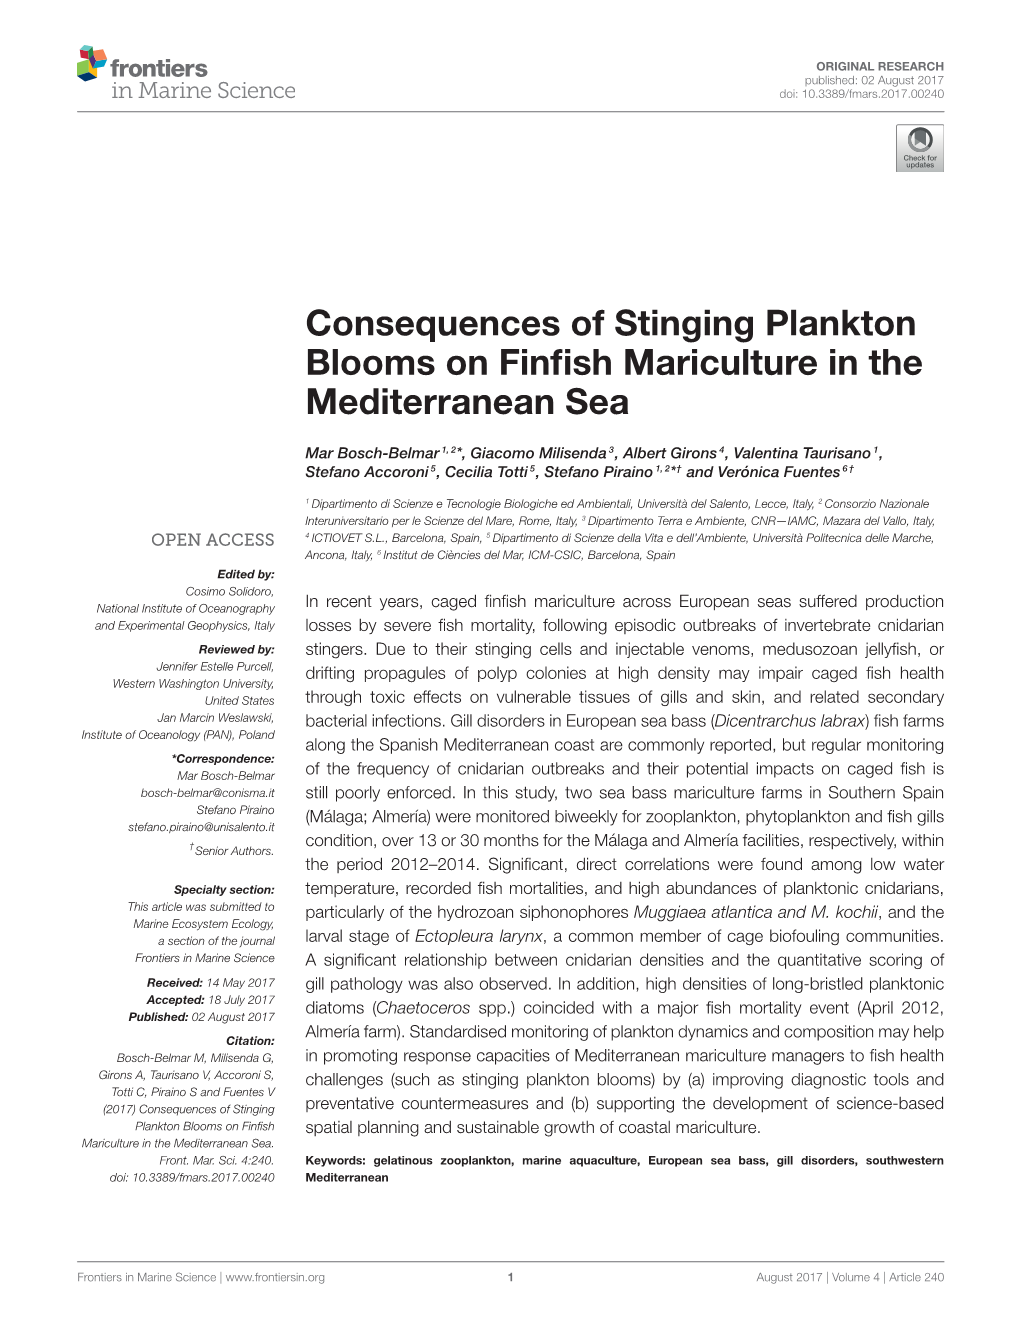 Consequences of Stinging Plankton Blooms on Finfish Mariculture in The